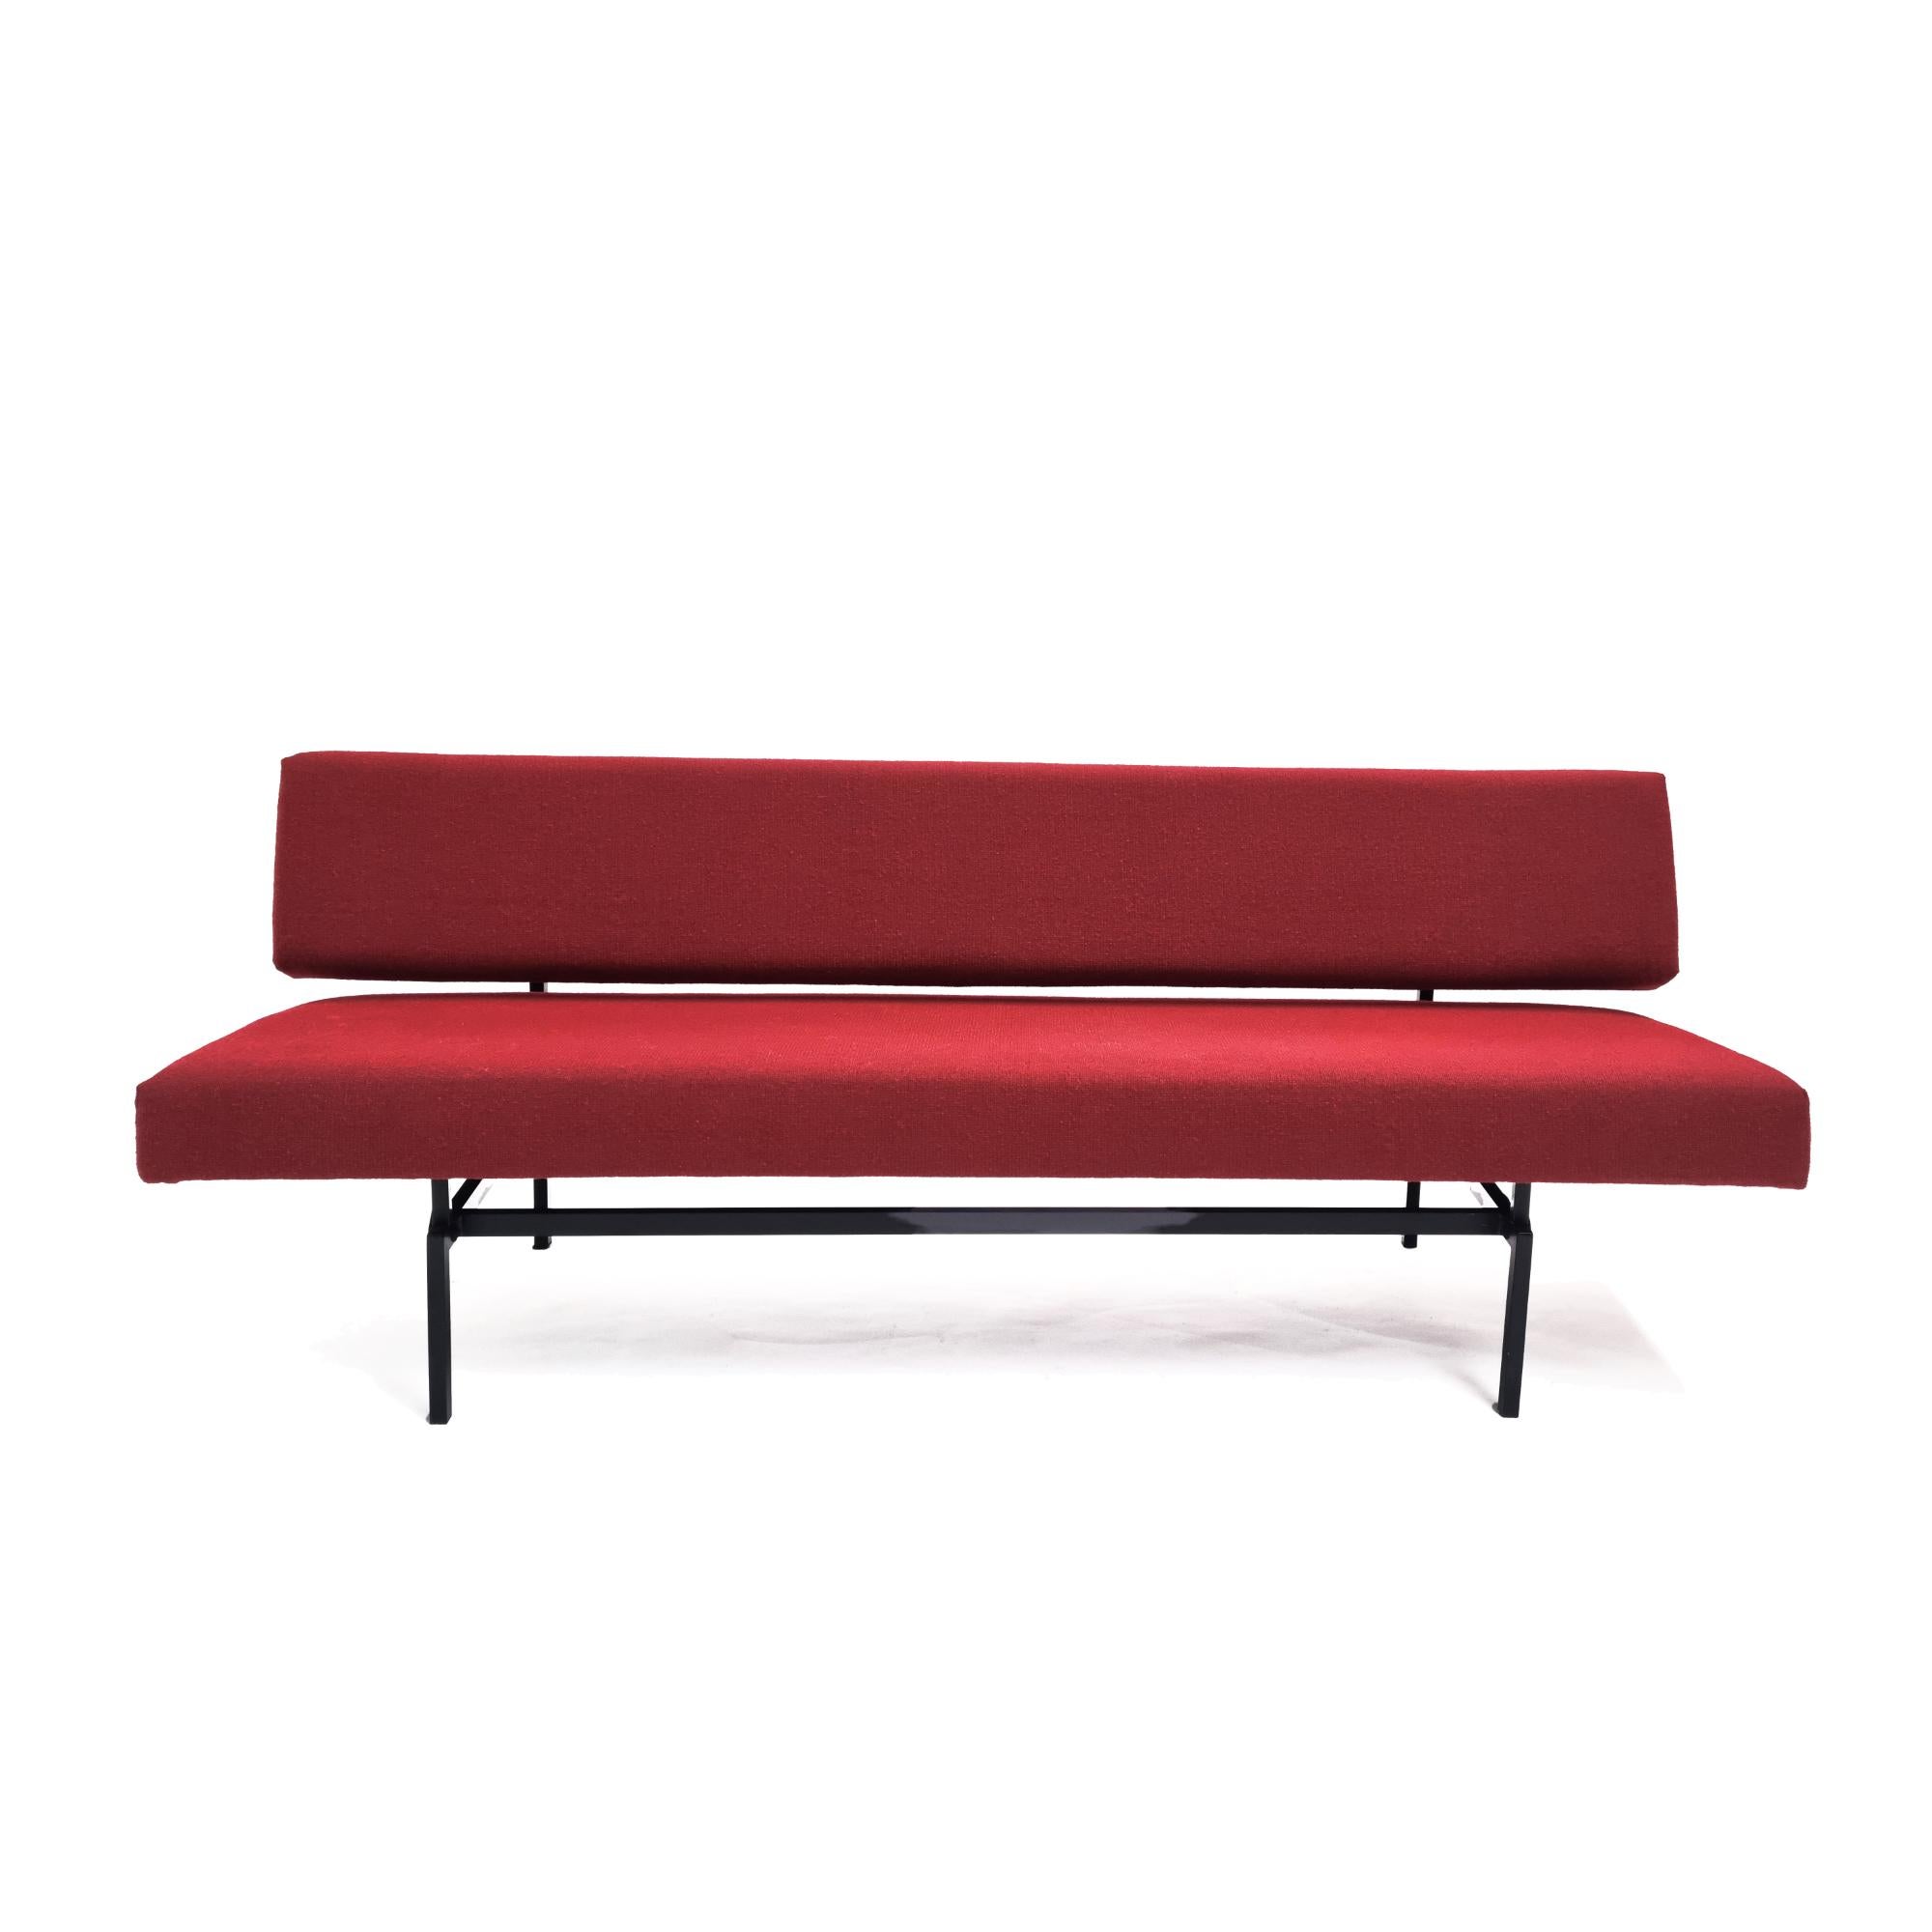 Sleeping sofa, designed by the famous Martin Visser in the 60’s. Fabricated by ‘t Spectrum, The Netherlands. Simple high quality metal structure with maximum comfort. The sofa can be turned into a (day)bed in a manner of seconds due to the easy